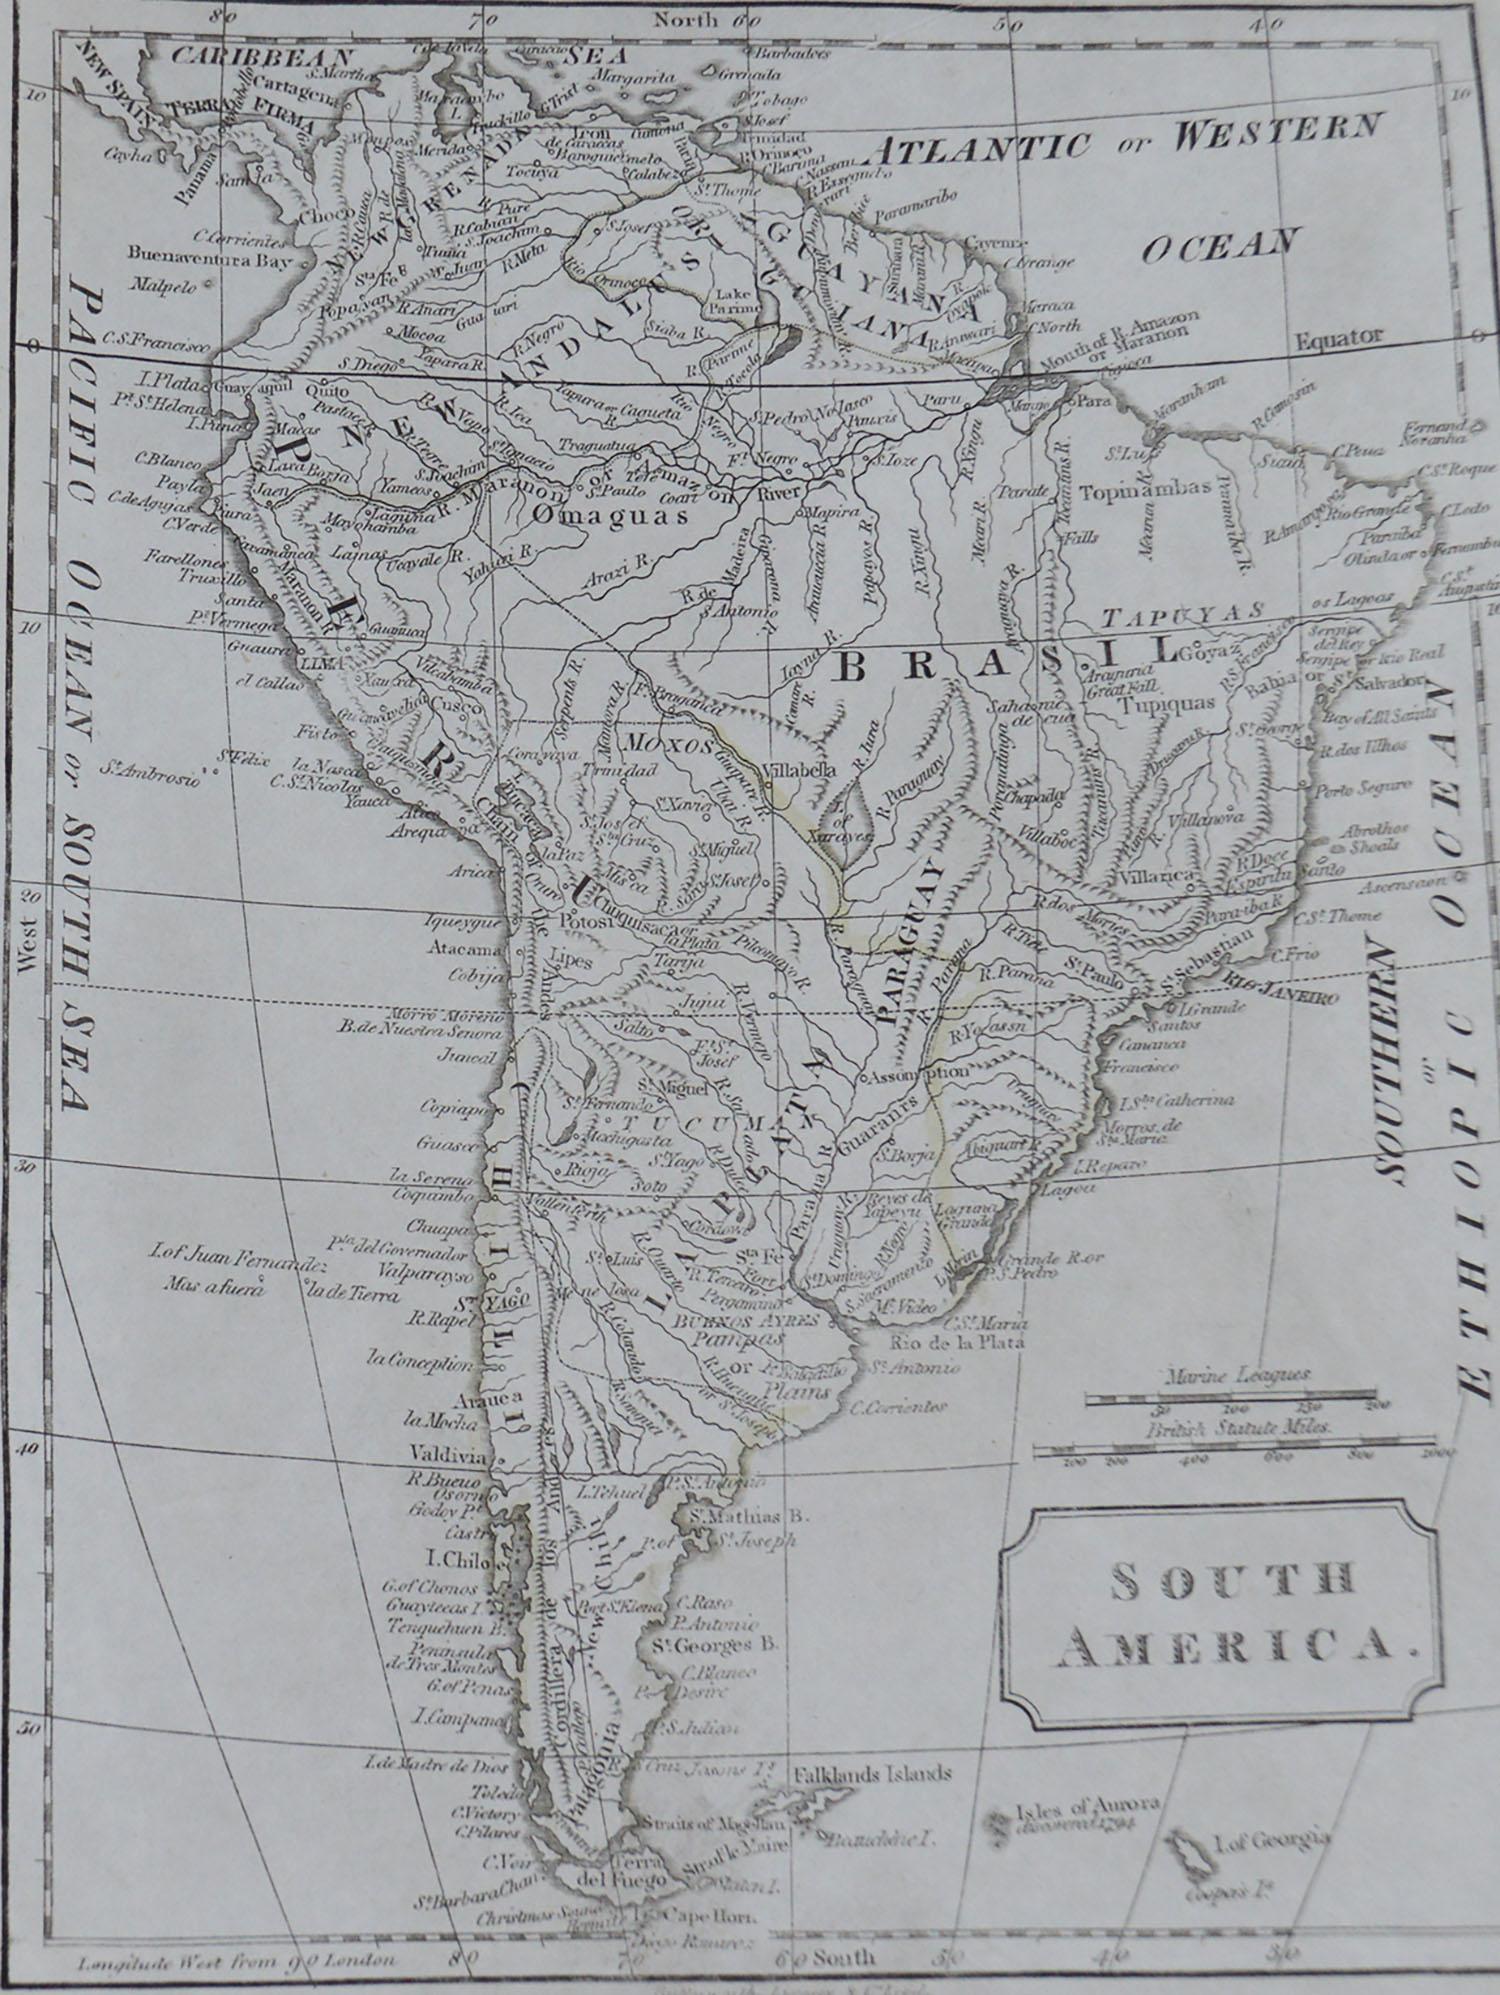 Great map of South America

Copper plate engraving

Published by Butterworth, Livesey & Co., circa 1830

Unframed.



